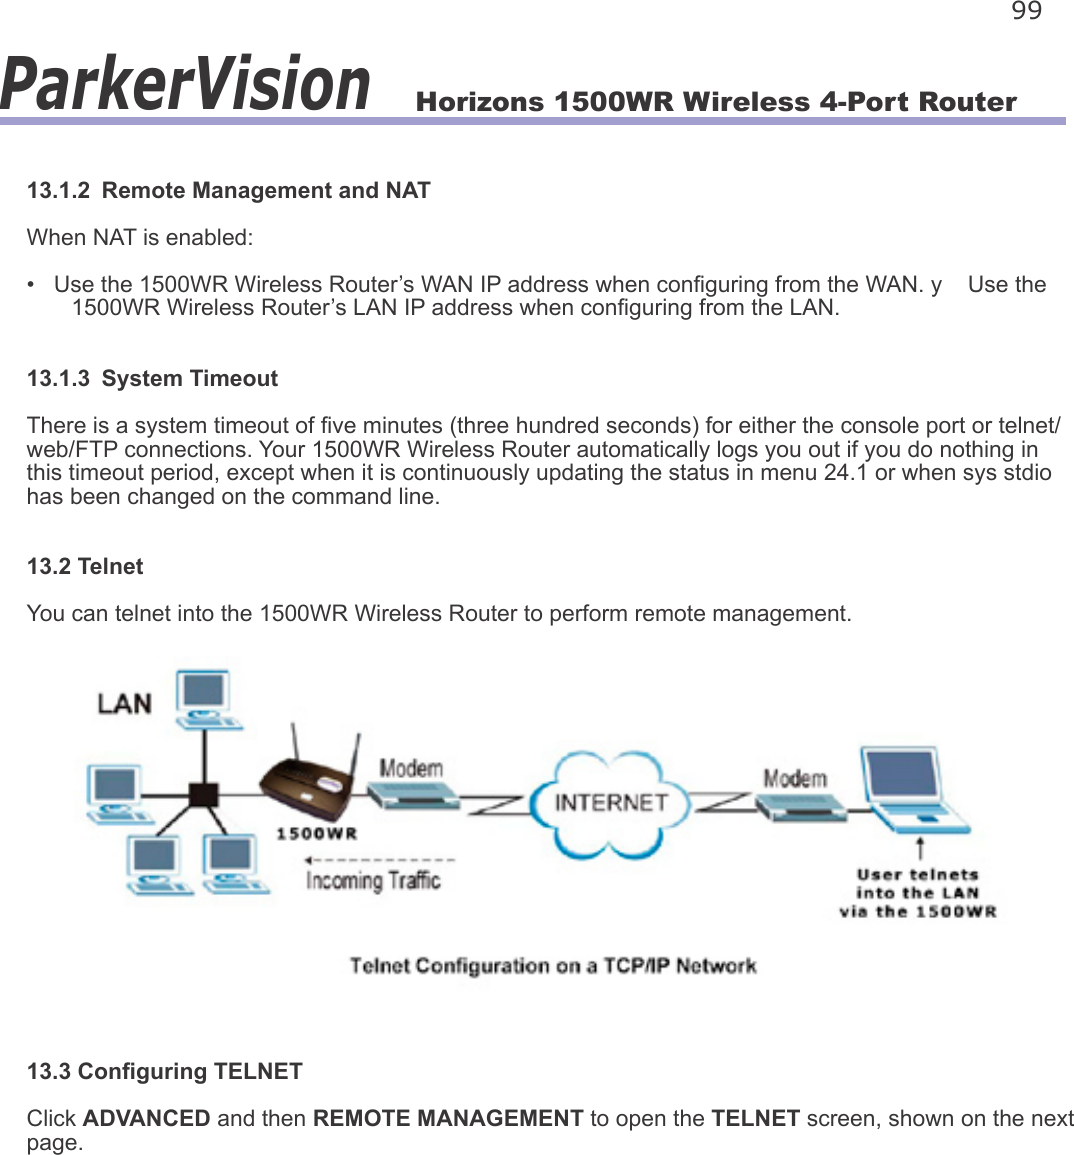 Horizons 1500WR Wireless 4-Port Router 99ParkerVision13.1.2  Remote Management and NATWhen NAT is enabled:•   Use the 1500WR Wireless Router’s WAN IP address when conguring from the WAN. y    Use the        1500WR Wireless Router’s LAN IP address when conguring from the LAN.13.1.3  System TimeoutThere is a system timeout of ve minutes (three hundred seconds) for either the console port or telnet/web/FTP connections. Your 1500WR Wireless Router automatically logs you out if you do nothing in this timeout period, except when it is continuously updating the status in menu 24.1 or when sys stdio has been changed on the command line.13.2 TelnetYou can telnet into the 1500WR Wireless Router to perform remote management.13.3 Conguring TELNETClick ADVANCED and then REMOTE MANAGEMENT to open the TELNET screen, shown on the next page.